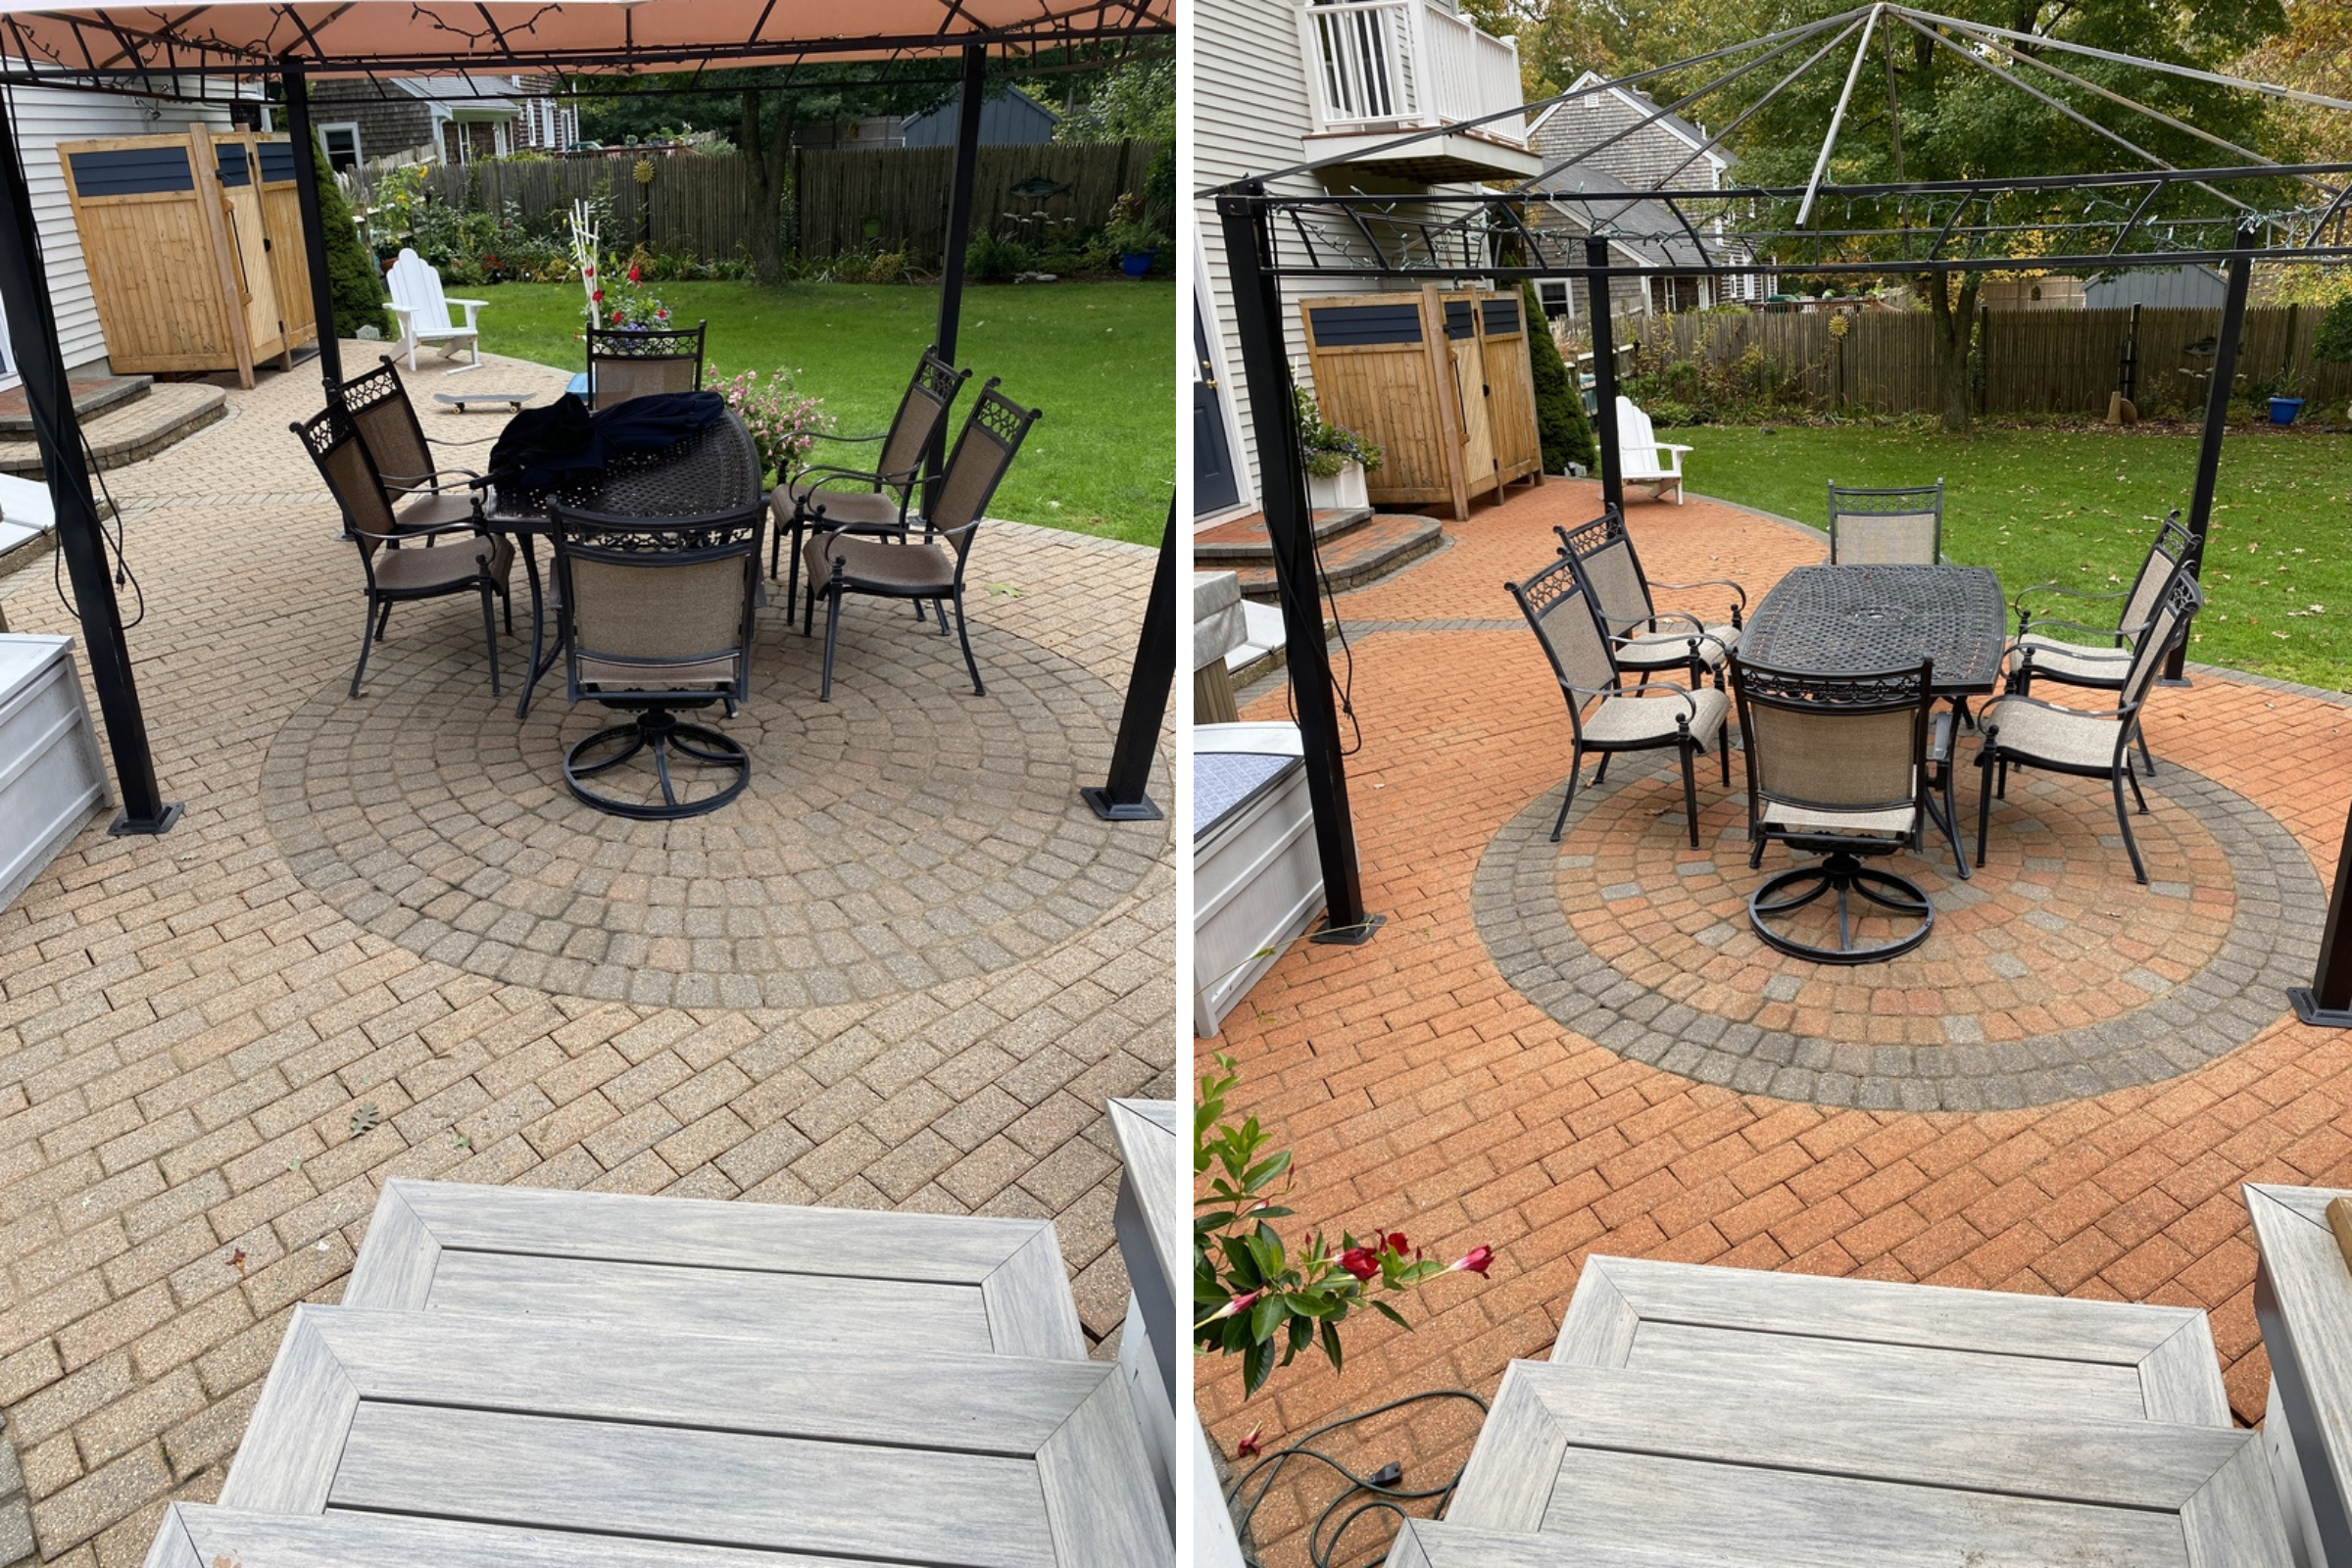 Two images comparing a patio area before and after the restoration of paver color. The first image shows the patio with faded pavers under a metal pergola with outdoor furniture. The second image presents the same view, but with the pavers recolored in shades of terracotta, enhancing the warmth and inviting atmosphere of the outdoor space.